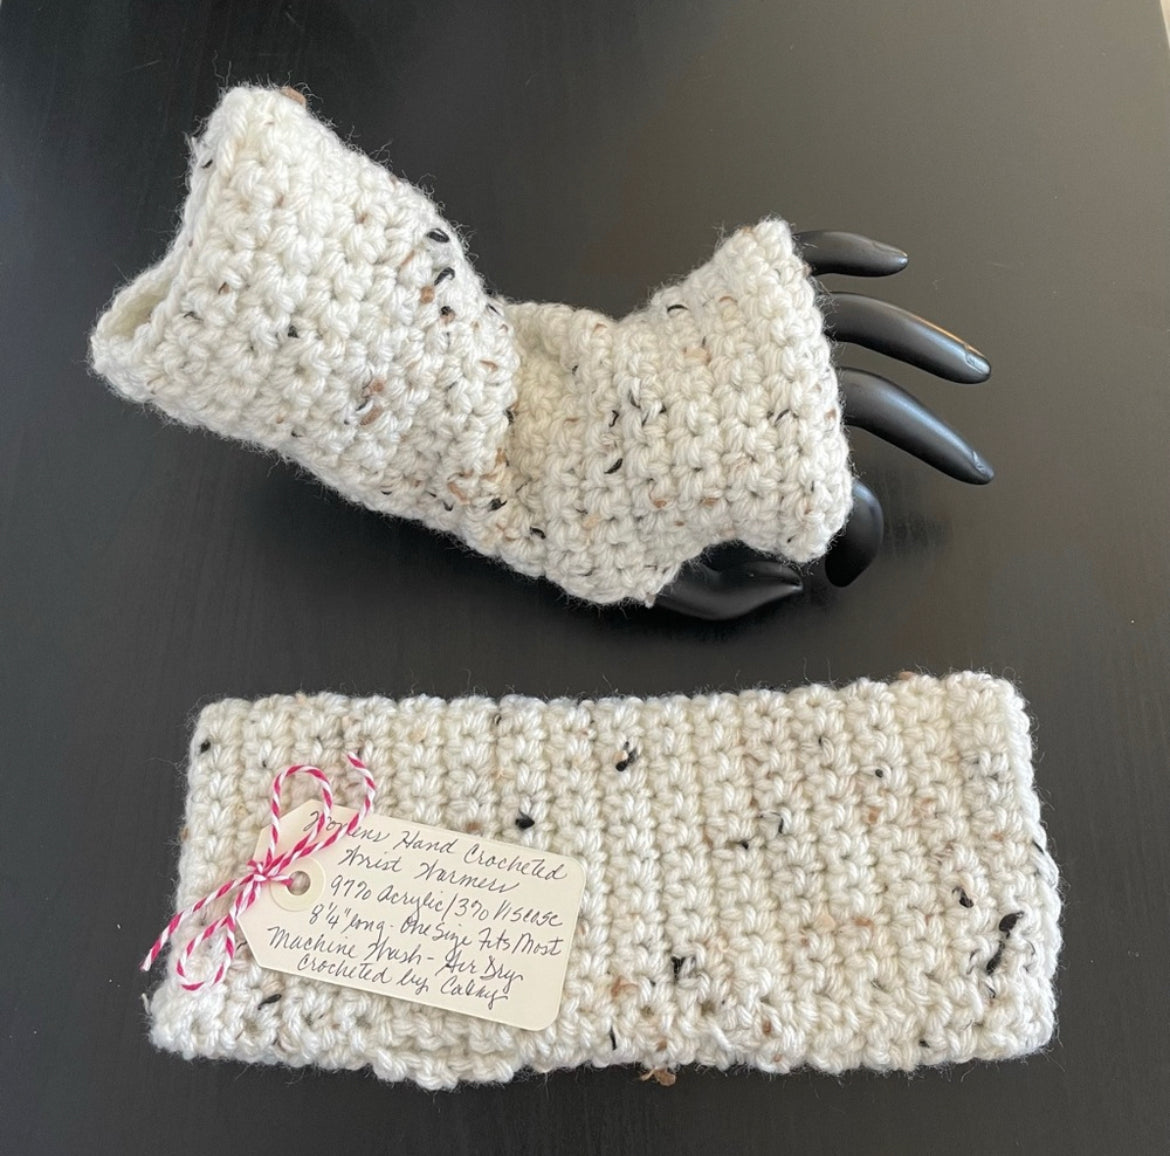 Texting Tech Wrist Warmers Cream Ivory Speckled Tweed Crochet Knit Spring Fall Winter Writing Gaming Fingerless Gloves